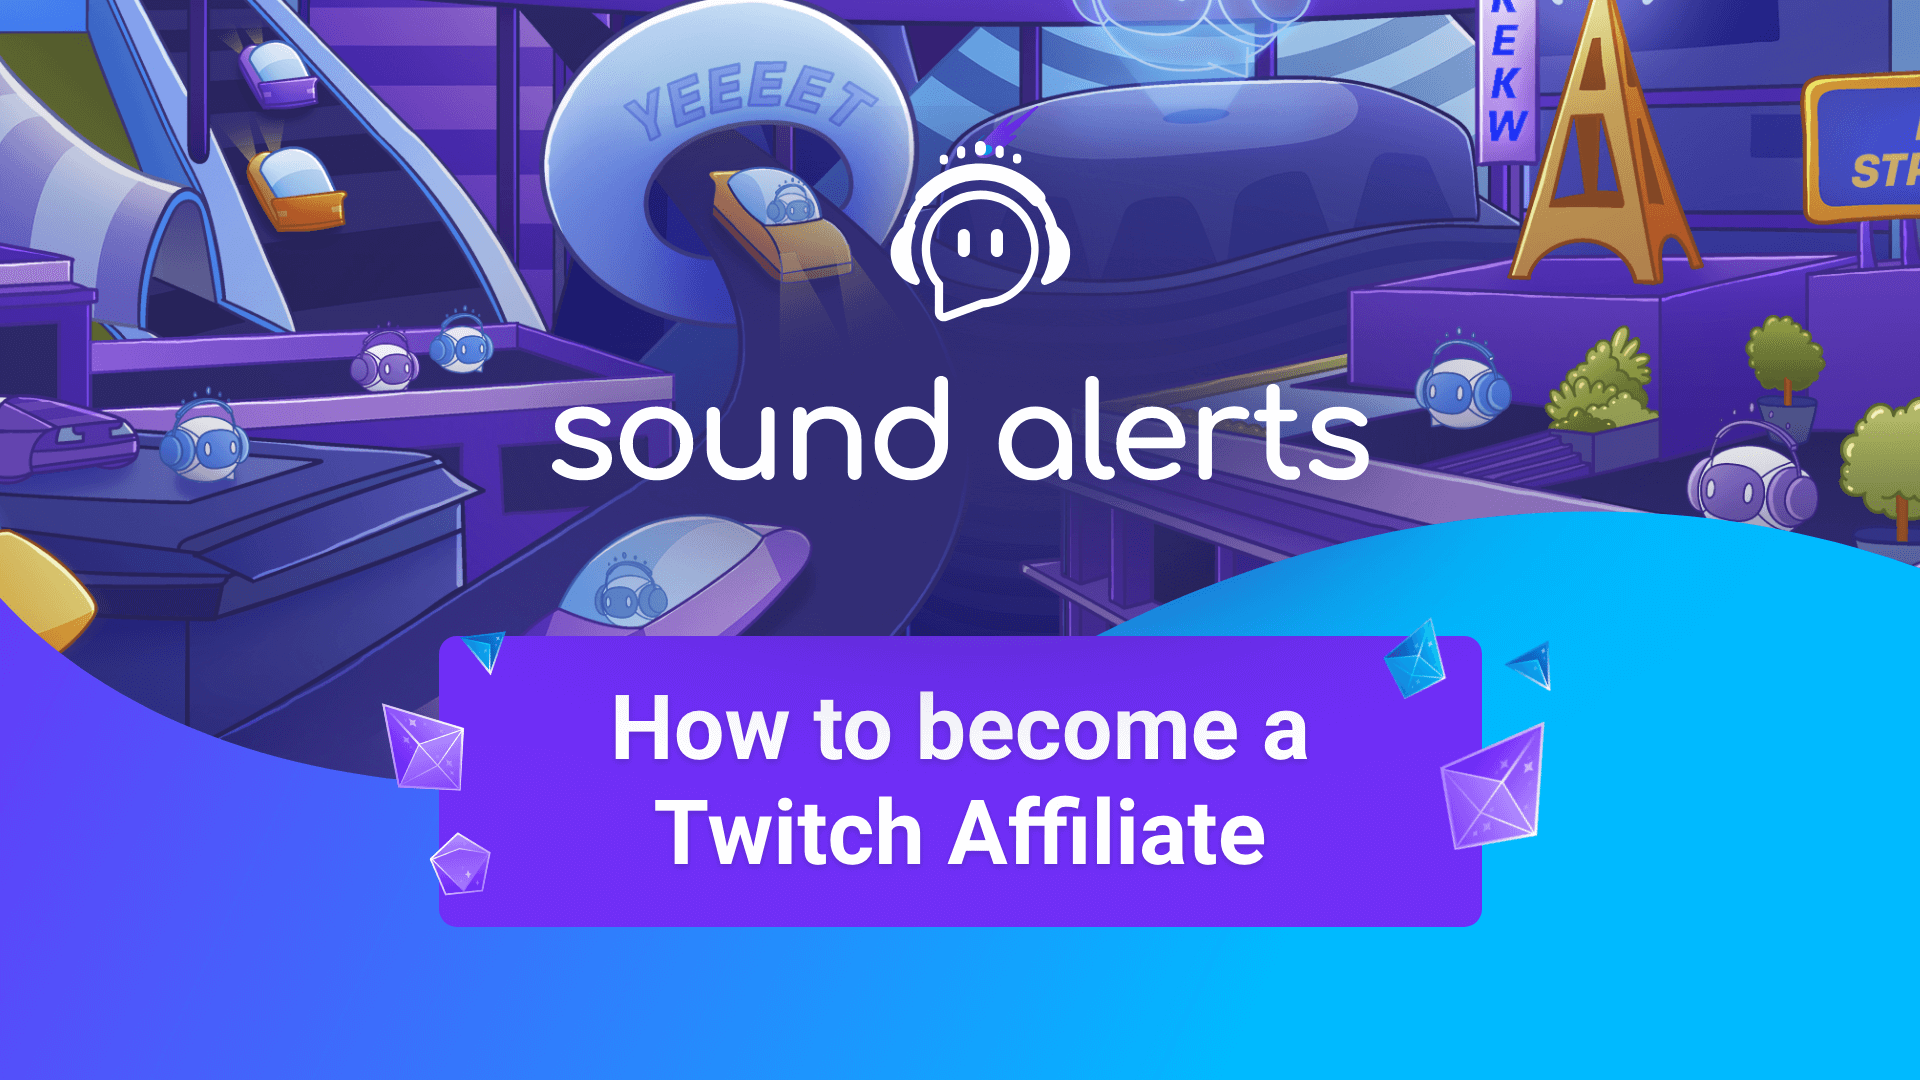 This image shows the blog thumbnail for the Sound Alerts blog post about becoming a Twitch Affiliate.